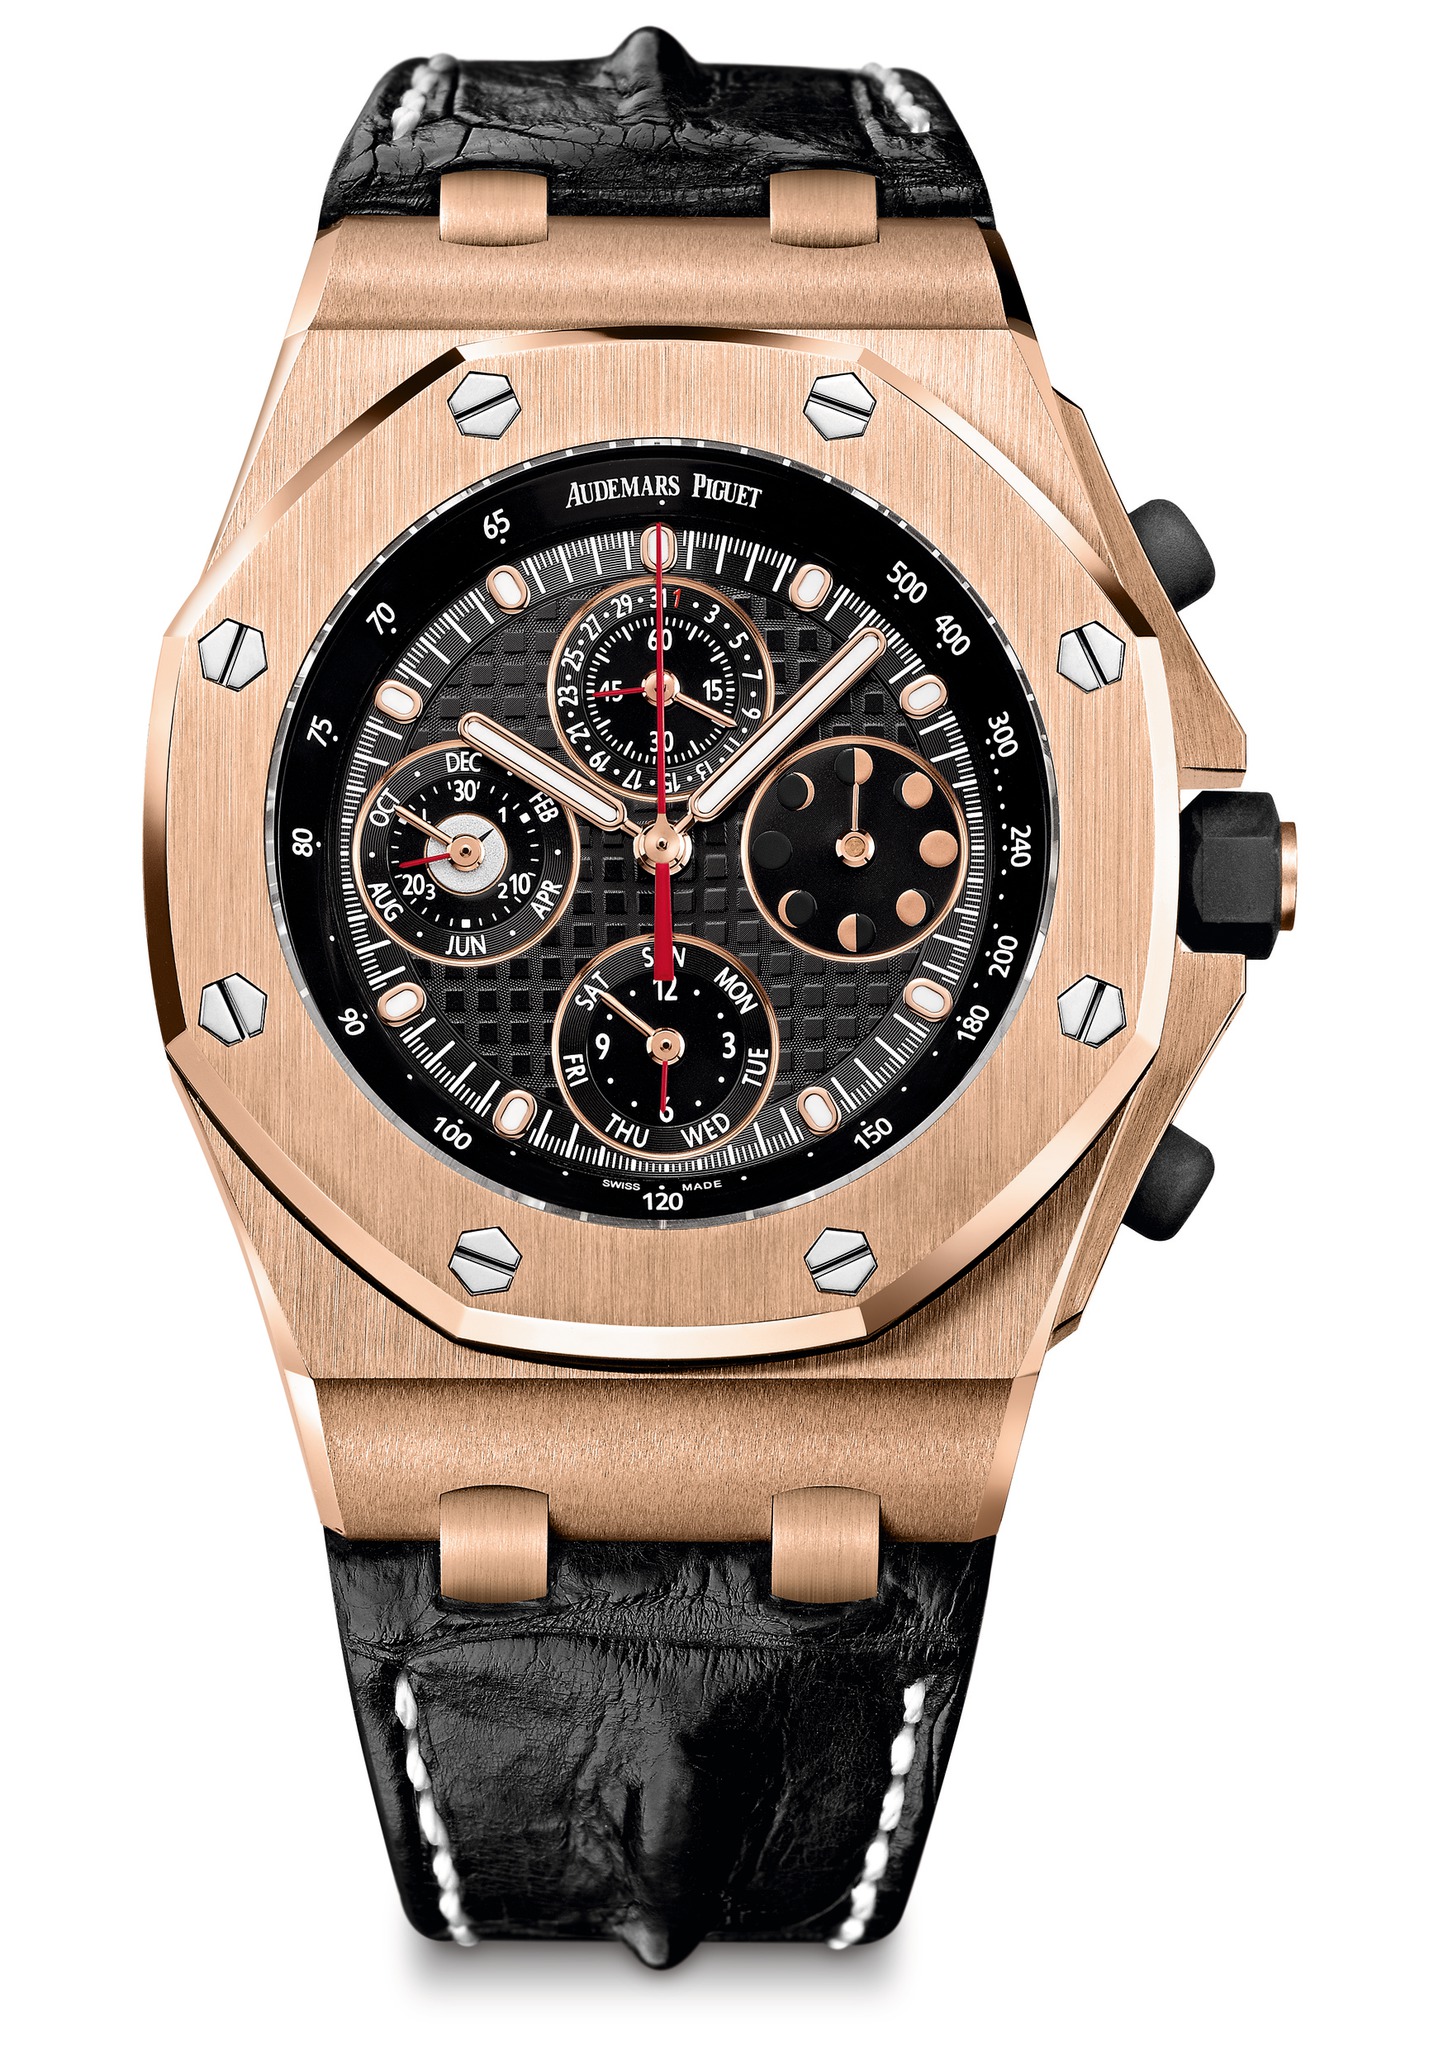 Audemars Piguet Royal Oak Offshore Perpetual Calendar Chronograph Pink Gold watch REF: 26209OR.OO.D101CR.01 - Click Image to Close